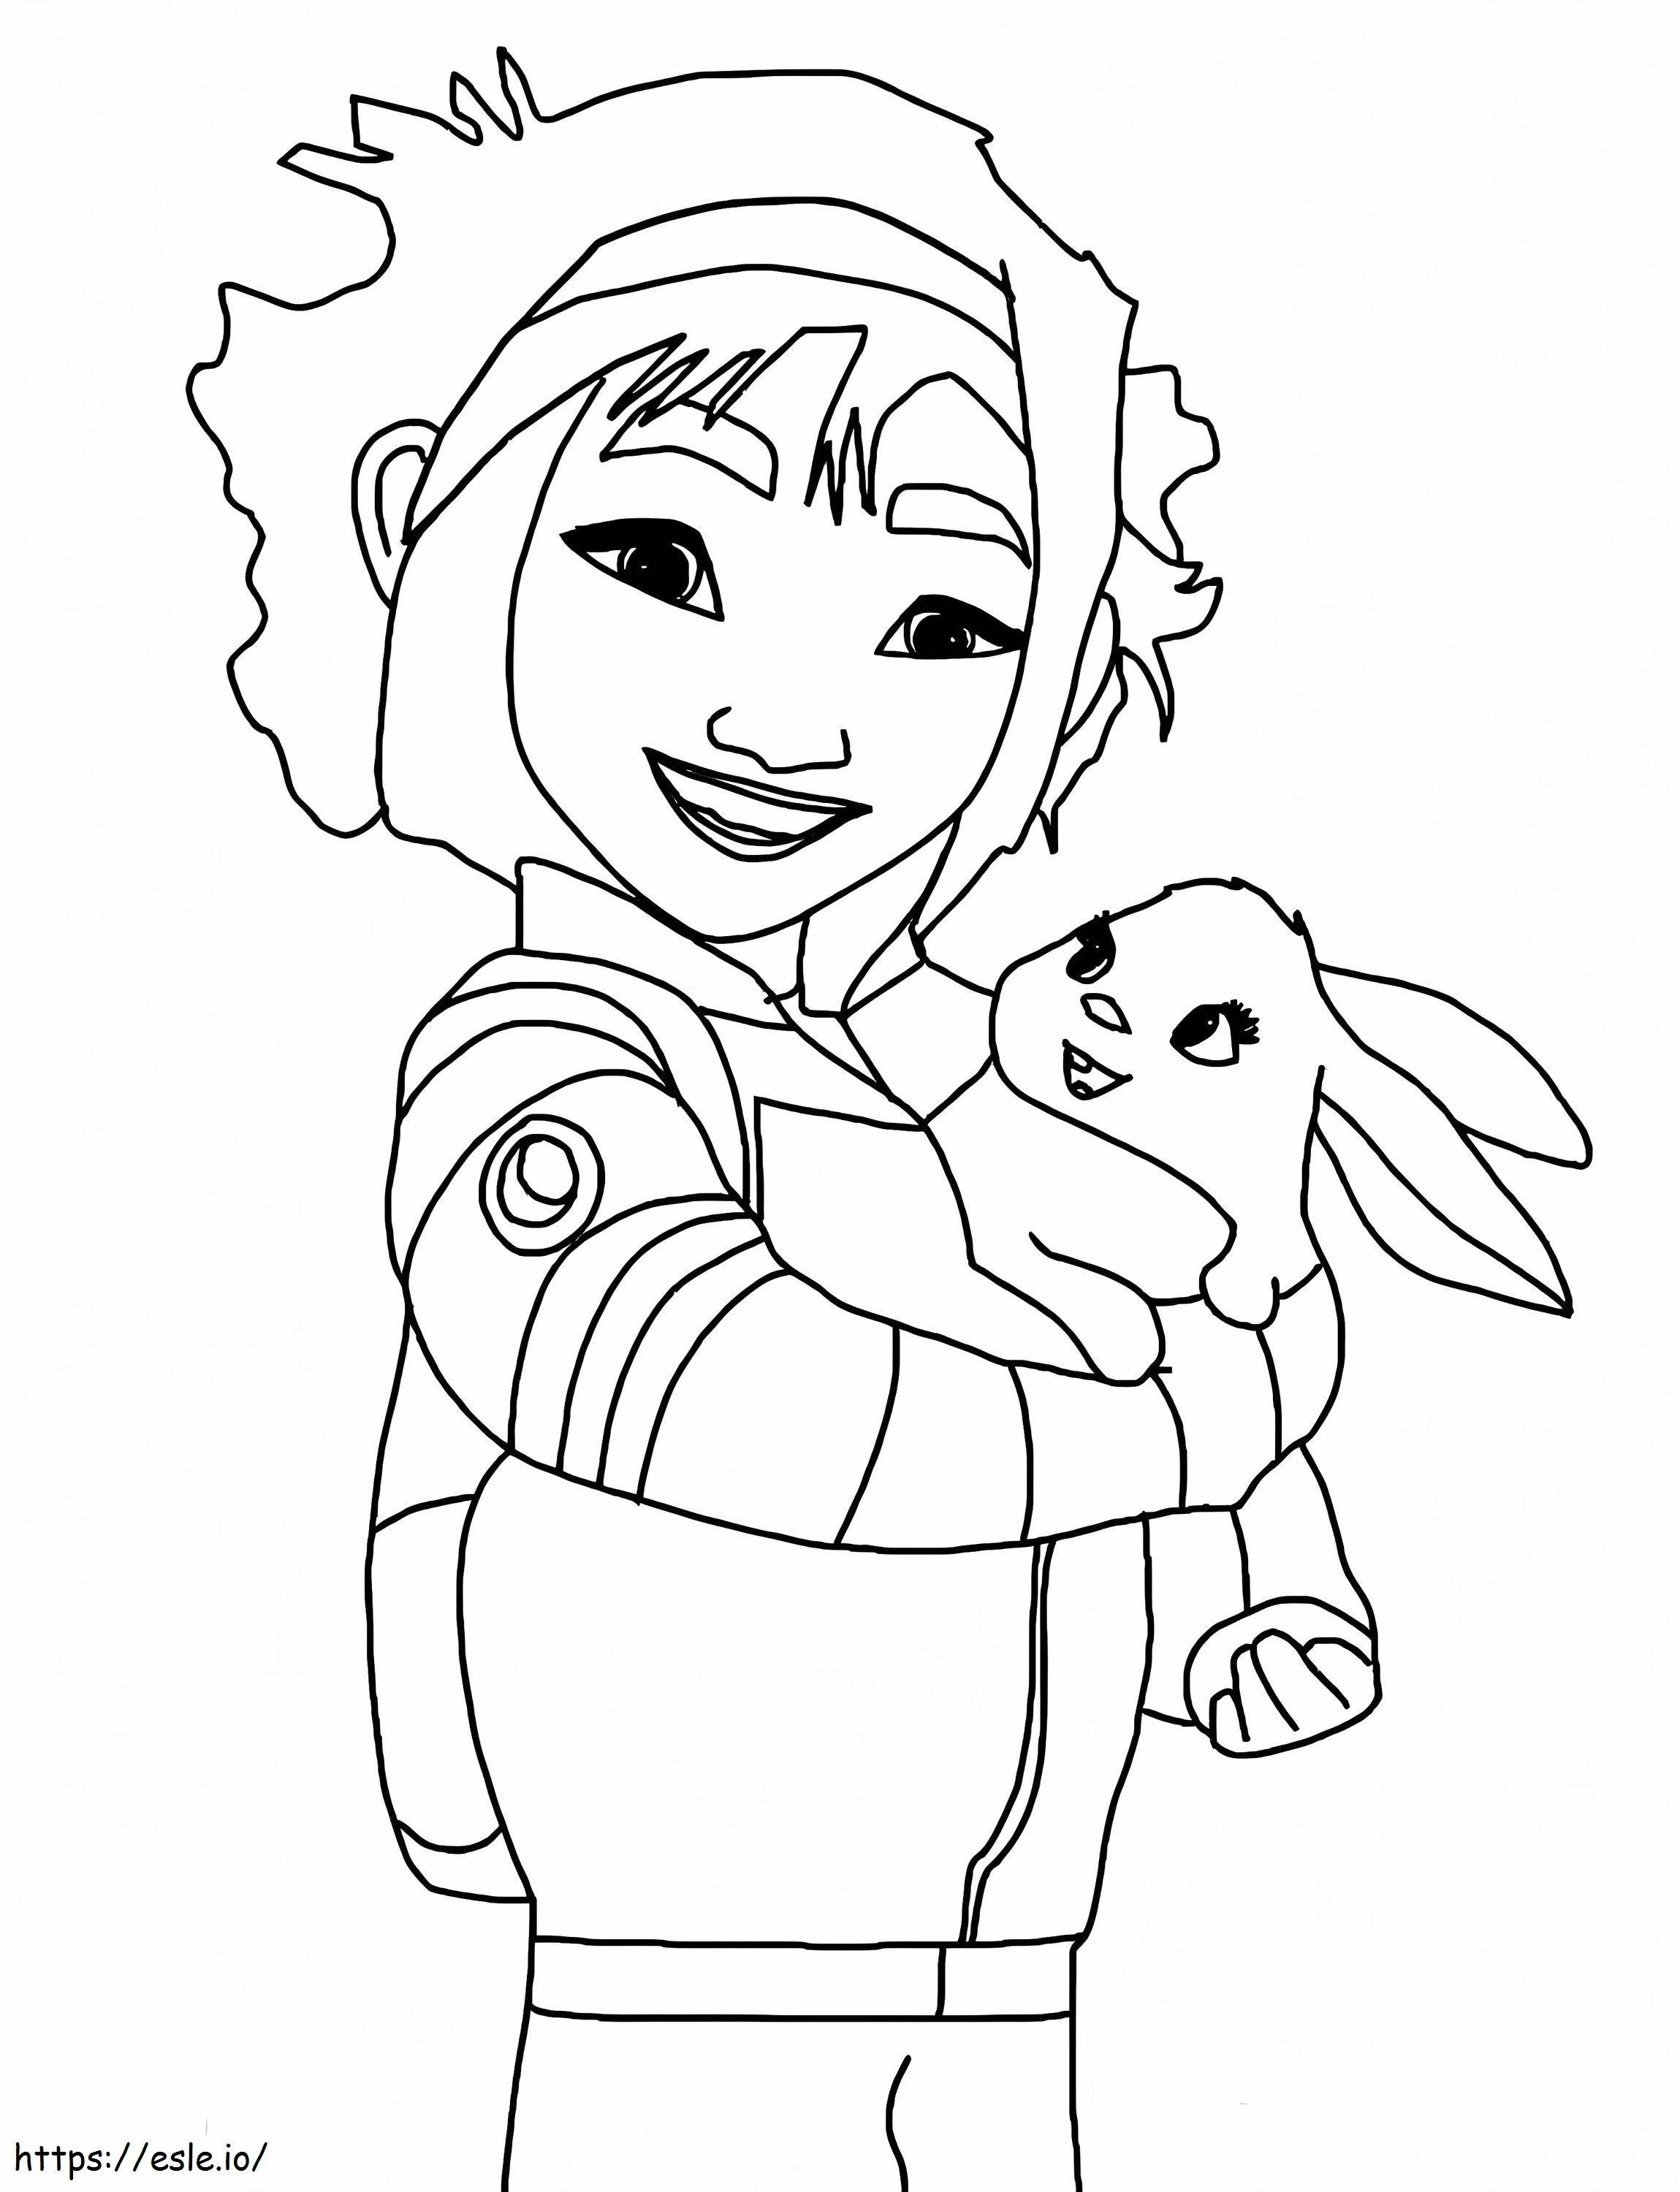 Fei Fei From Over The Moon coloring page